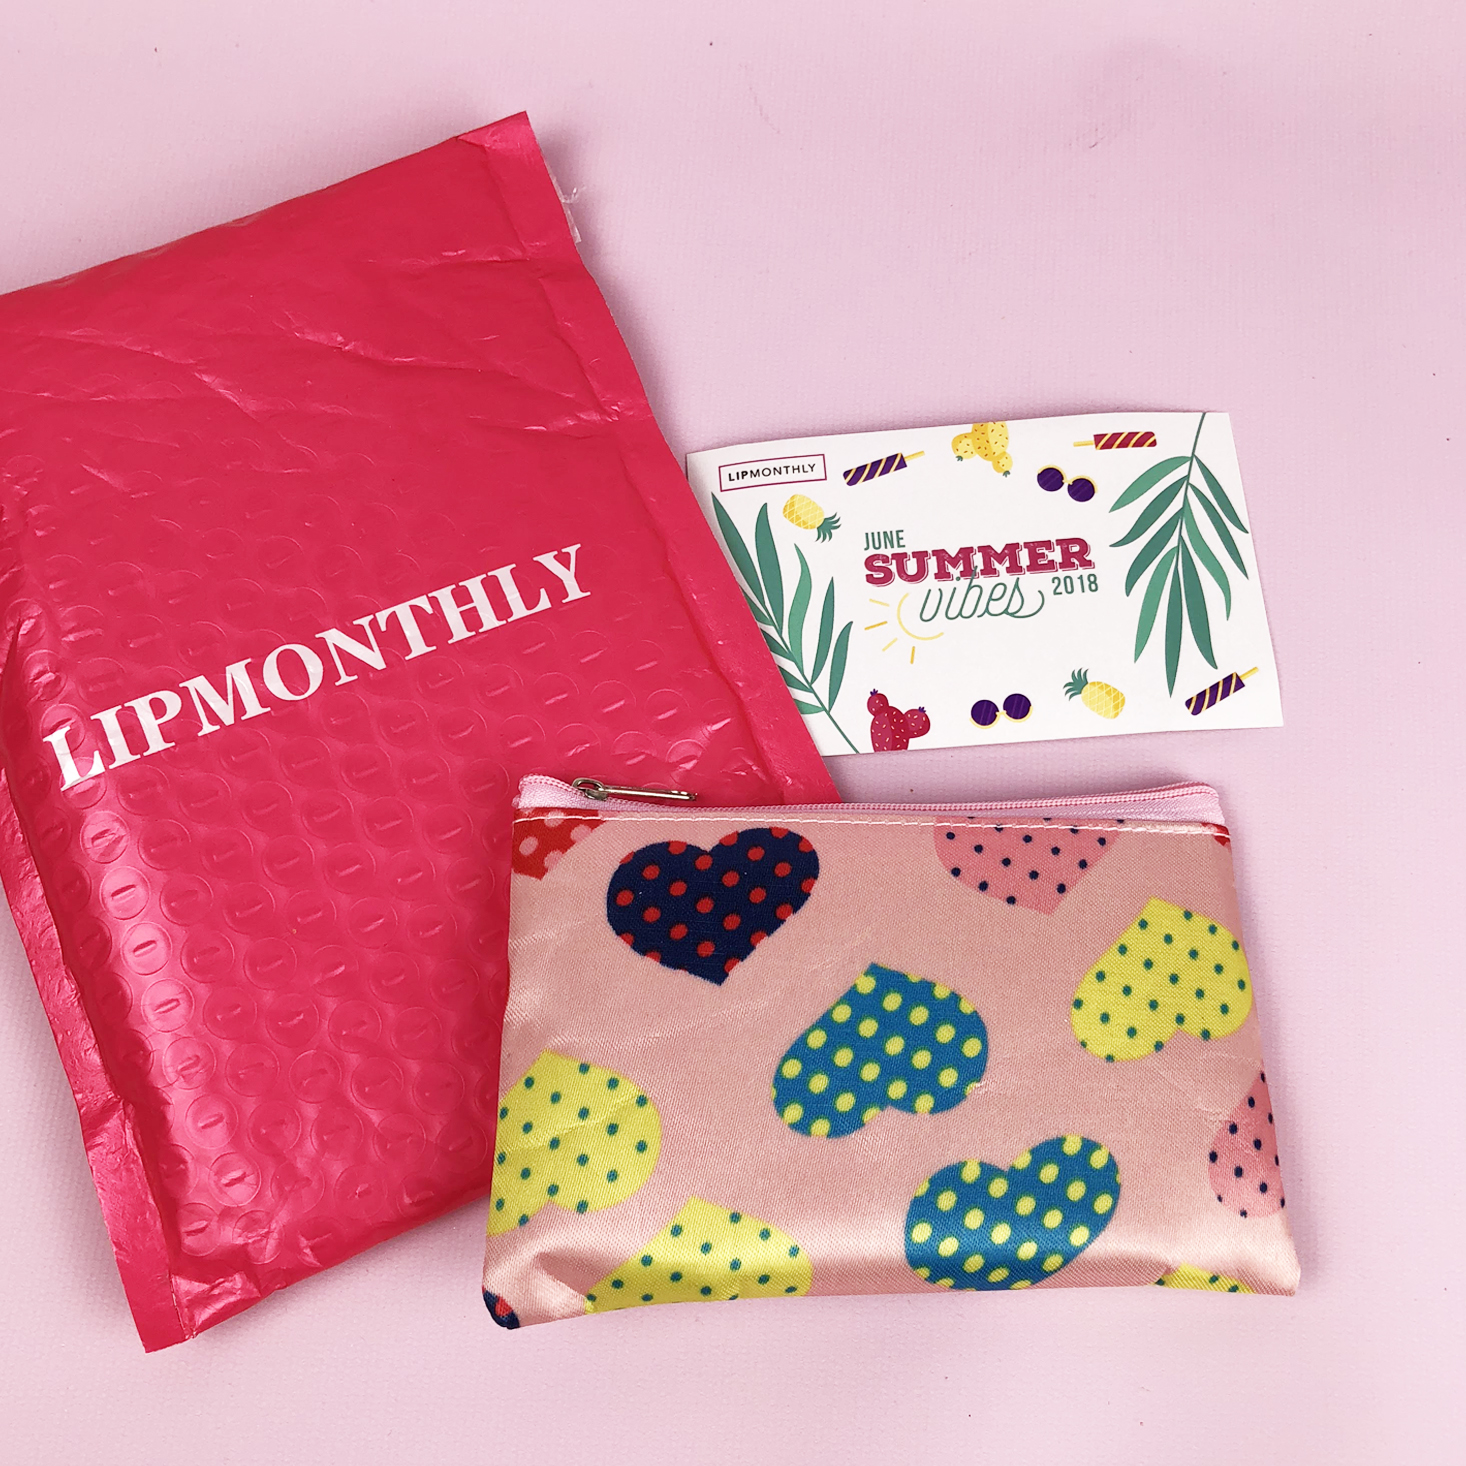 Lip Monthly Subscription Review + Coupon – June 2018